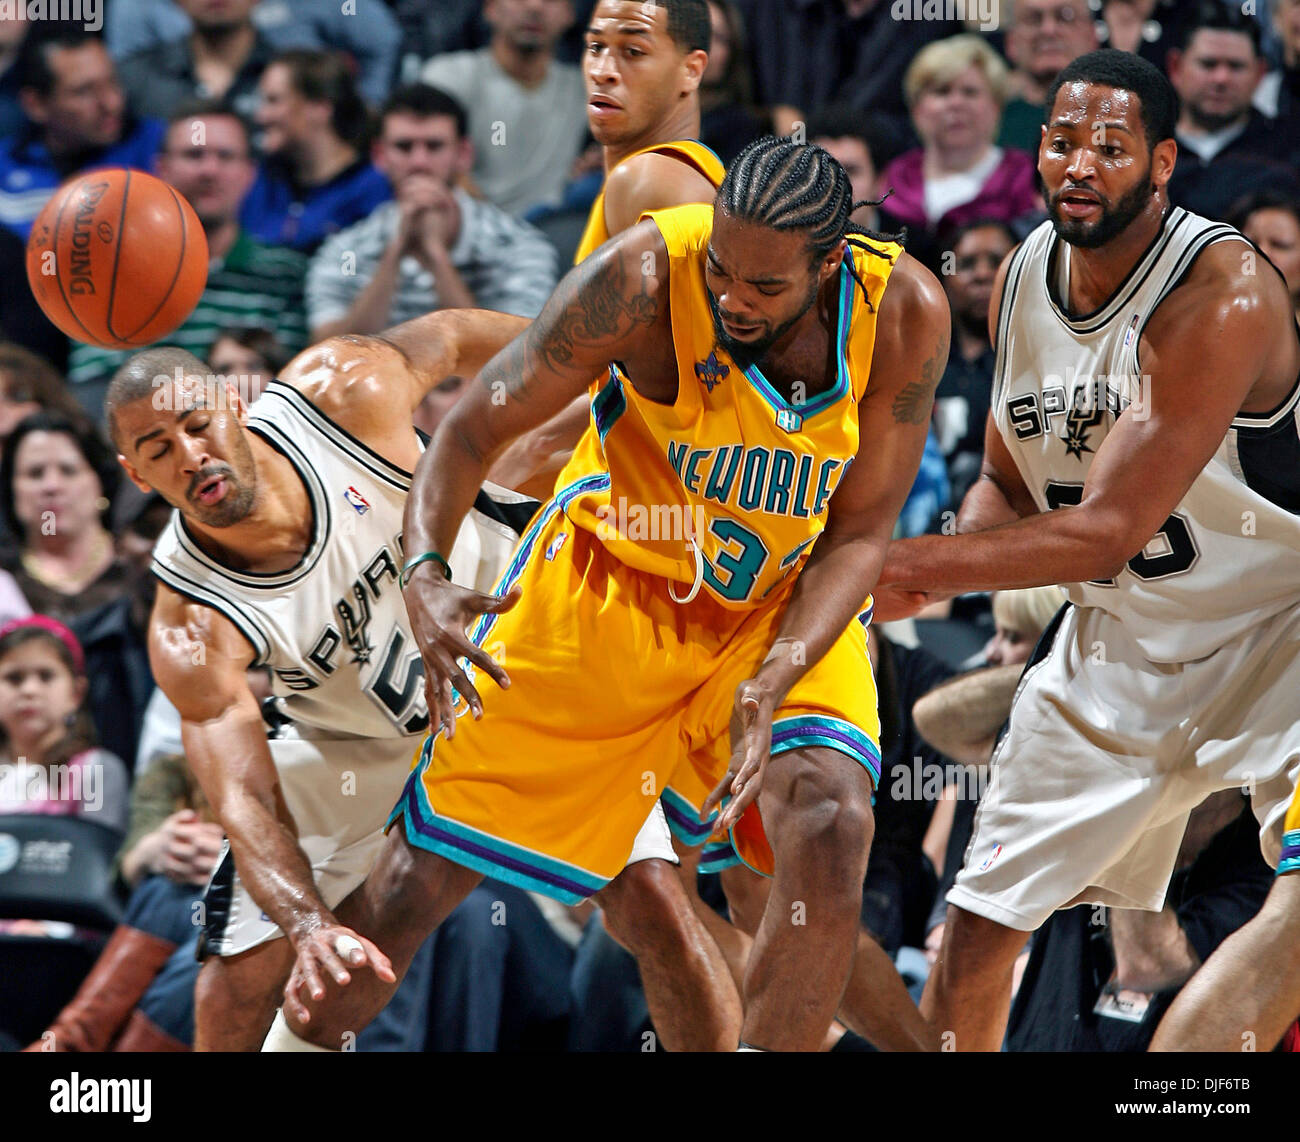 Jan 26, 2008 - SAN ANTONIO, Texas, USA - San Antonio Spurs versus New Orleans Hornets at the At&T Center. PICTURED:   Hornets center MELVIN ELY loses control uinder pressure from Spurs guard IME UDOKA  in the first half . (Credit Image: © TOM REEL/San Antonio Express-News/ZUMA Press) RESTRICTIONS: * San Antonio, Seattle Newspapers and USA Tabloids Rights OUT * Stock Photo